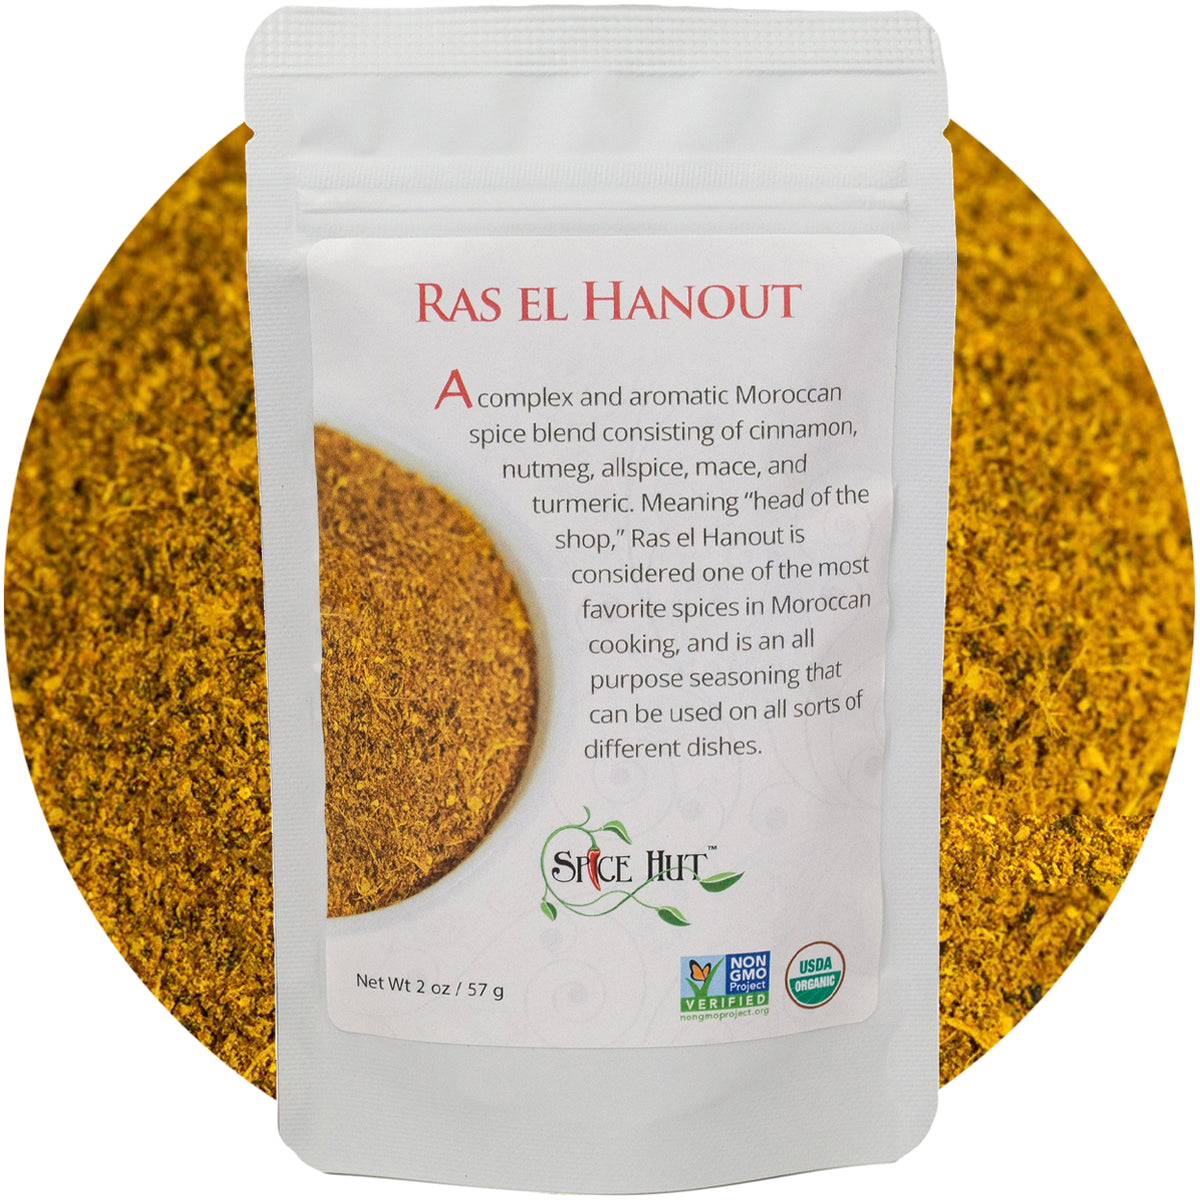 RAS EL HANOUT (Moroccan Blend) — Greenpoint Trading Co